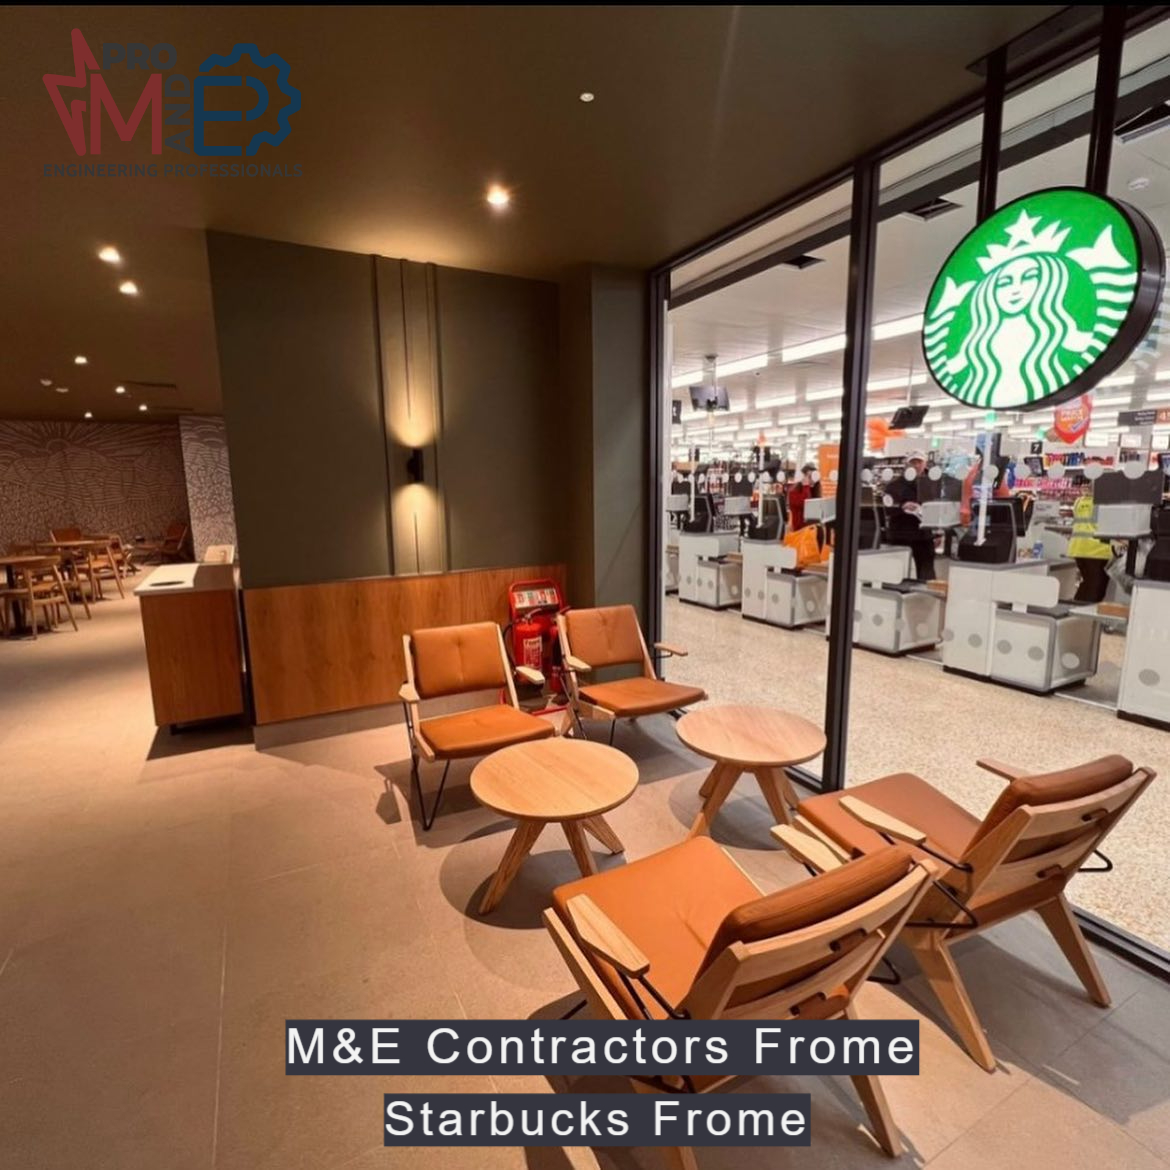 Starbucks project in Frome - M&E Pro